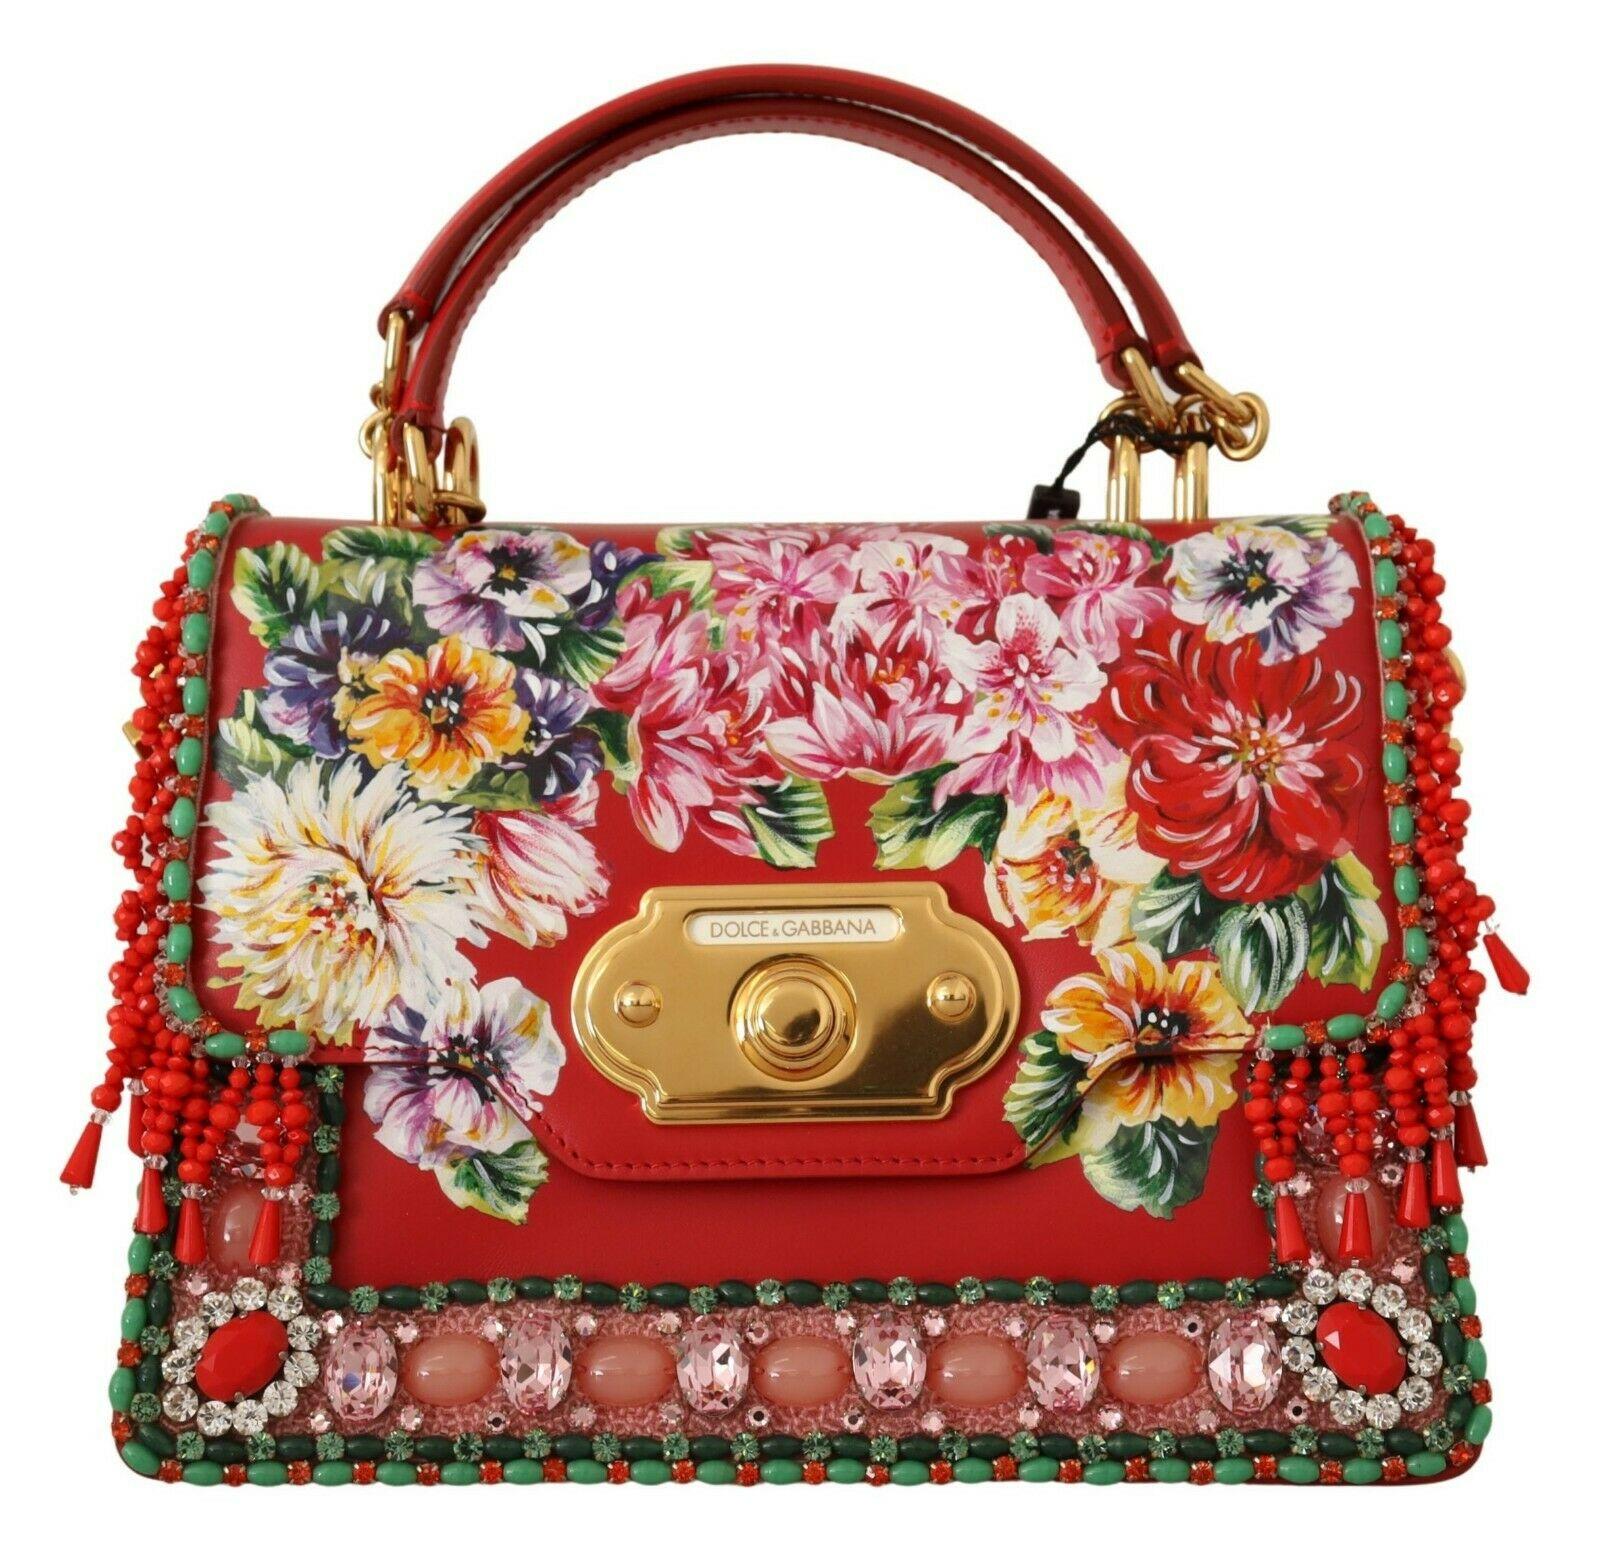 Gorgeous brand new with tags, 100% Authentic Dolce & Gabbana Leather Tote Shoulder Bag WELCOME with Crystals. Features an adjustable and detachable leather strap.

Model: WELCOME bag
Material: 70% Leather 15% Glass 10% ME 3% Nylon 2%